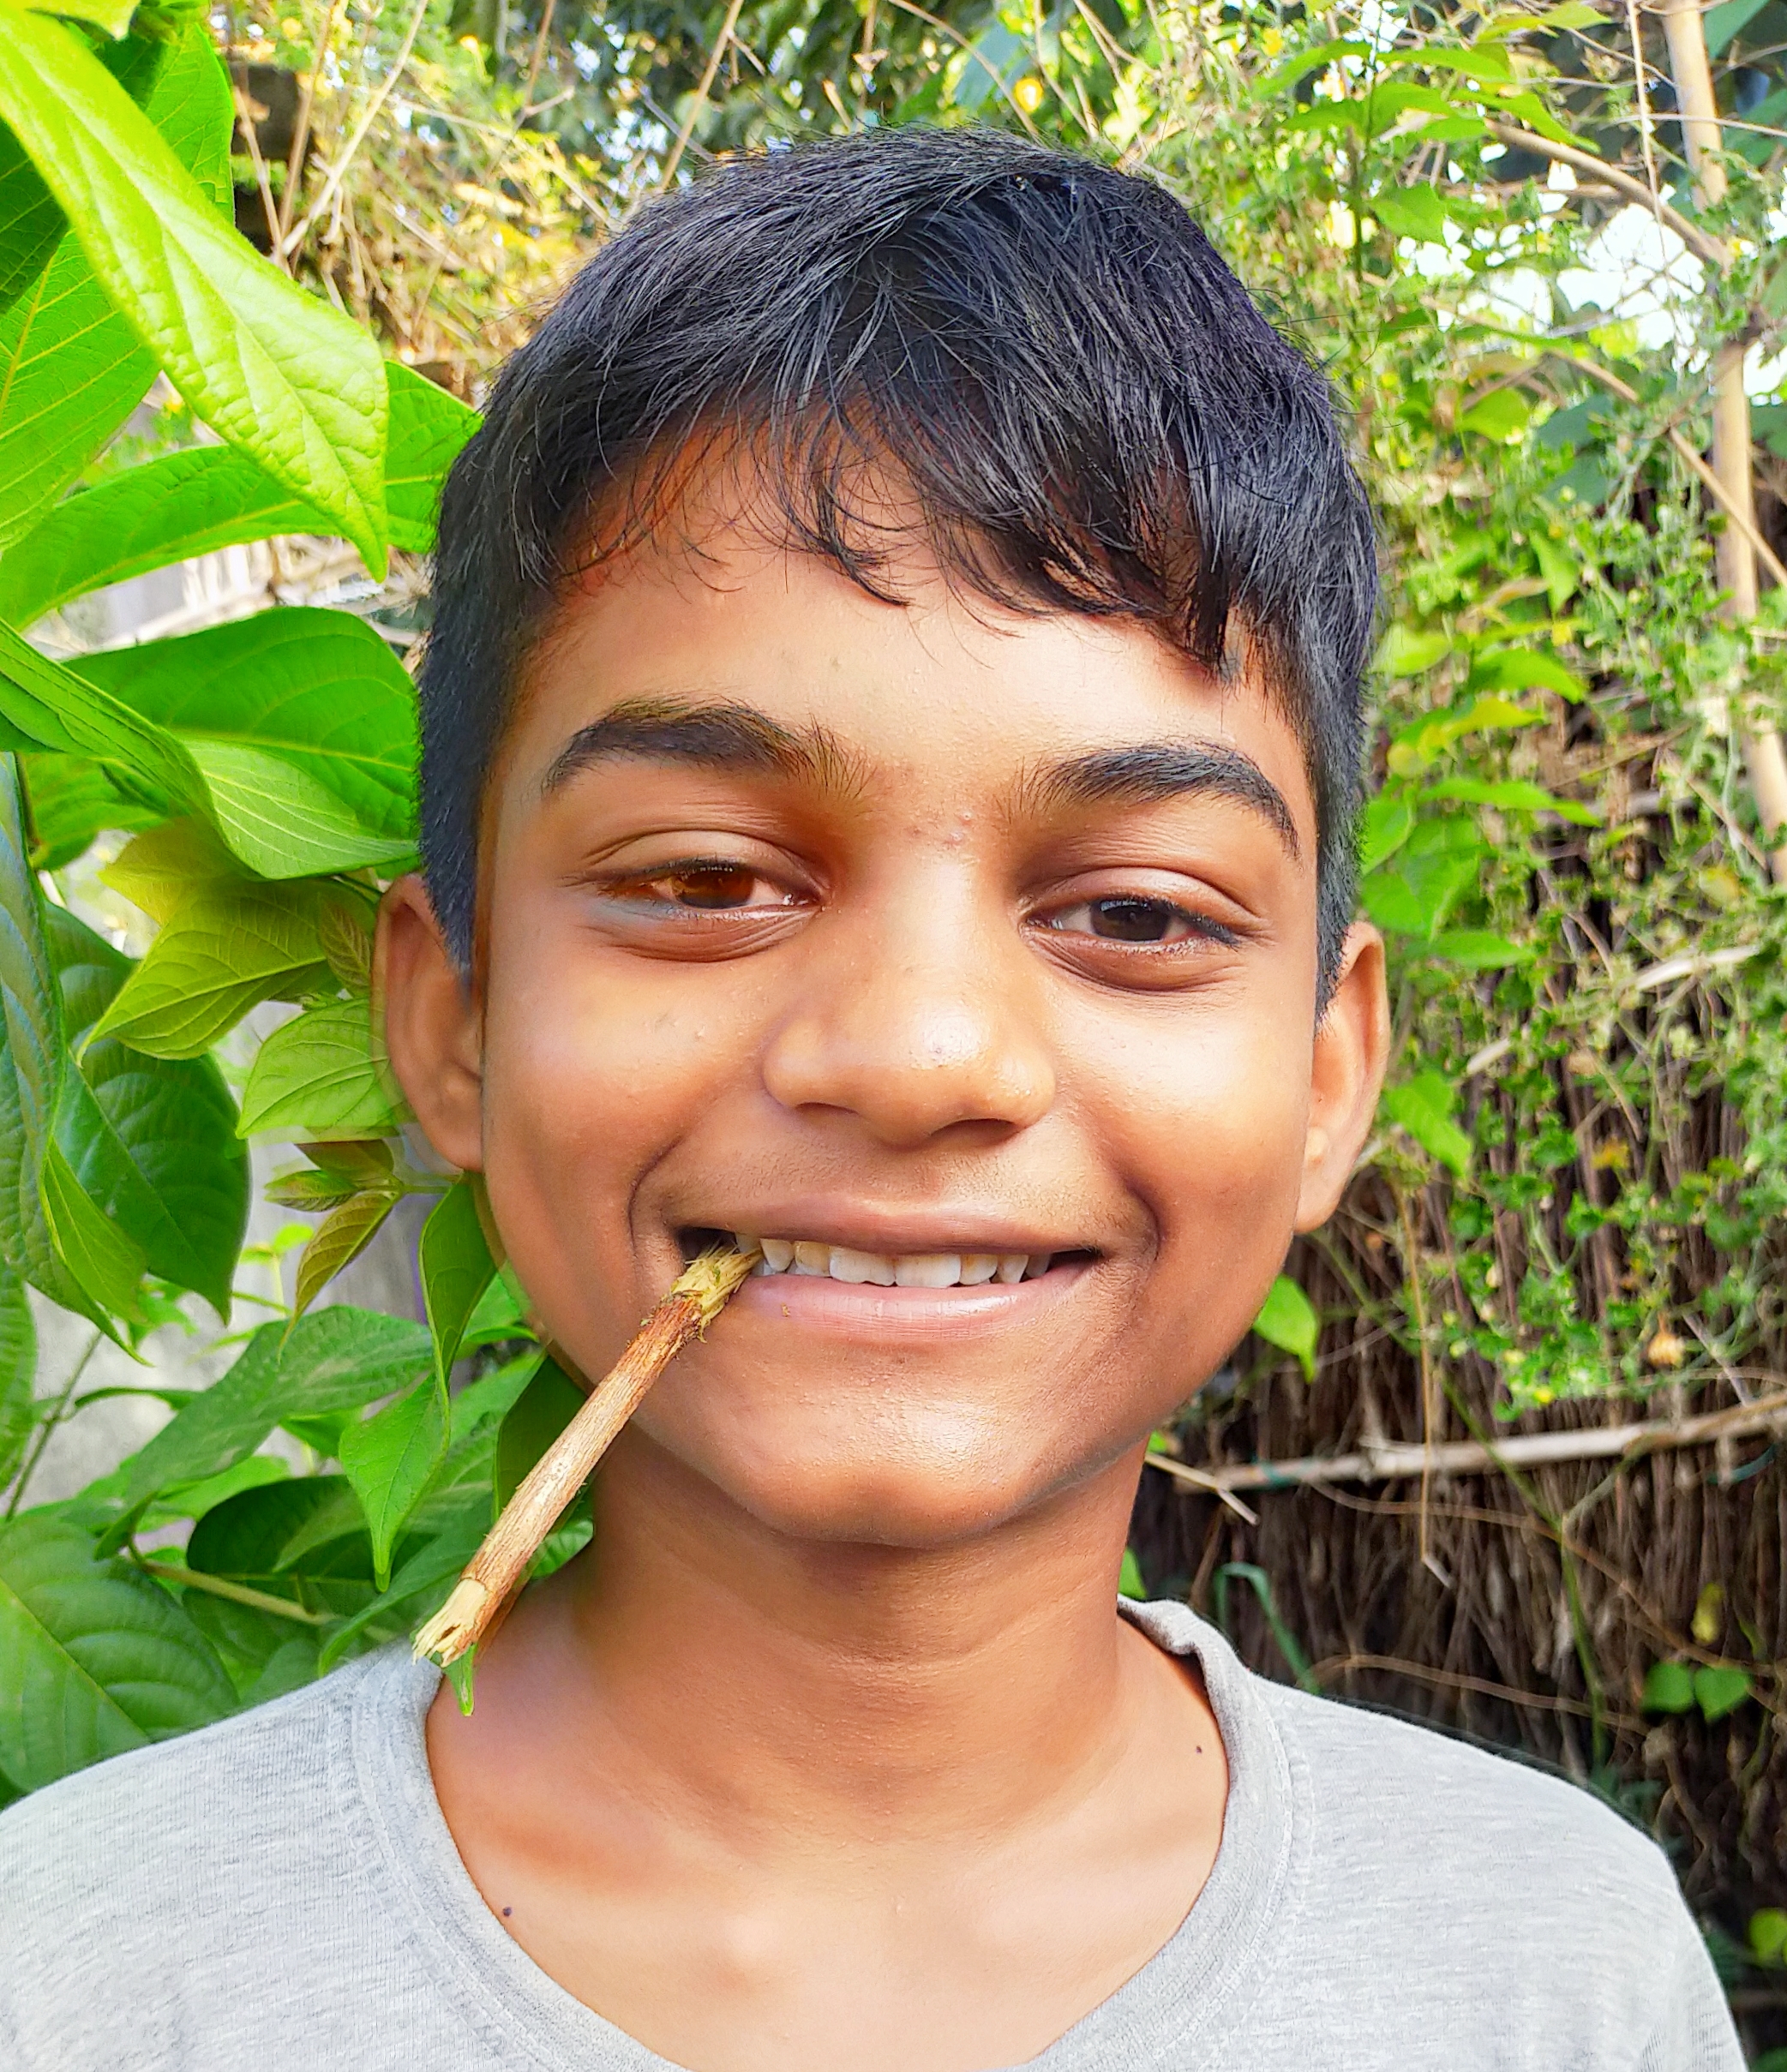 A boy with natural herbal toothbrush